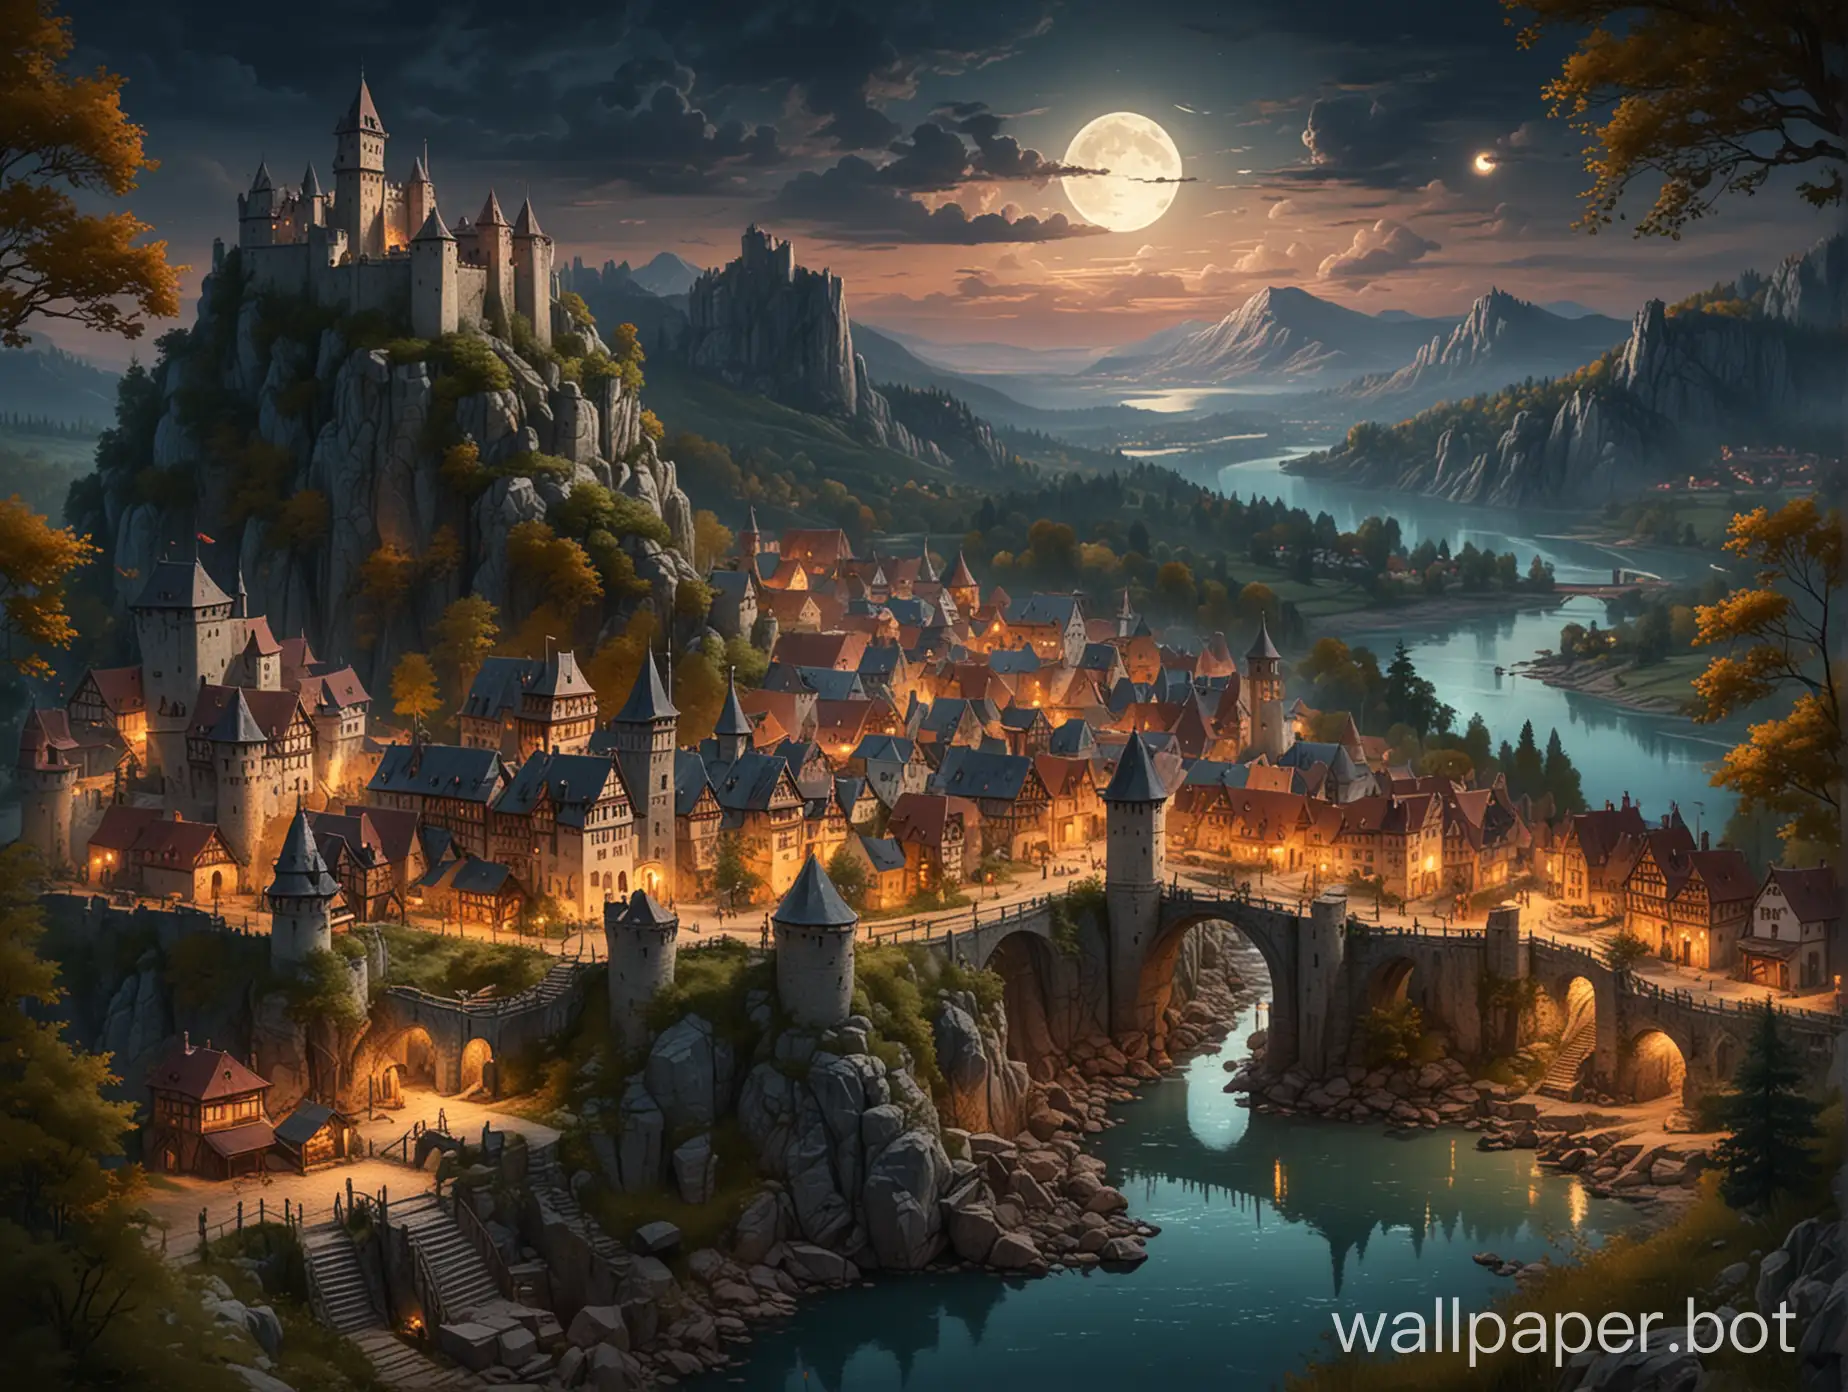 landscape, mountain in background, entire medieval village, fantasy, meadow, ramparts, fortifications, close aerial view of town, entrance view of town with a drawbridge, large trees, drawn style, colored, warm colors, detailed image, visible details, forest in the background, waterfalls, lake, at night, lighting, moon, night scene